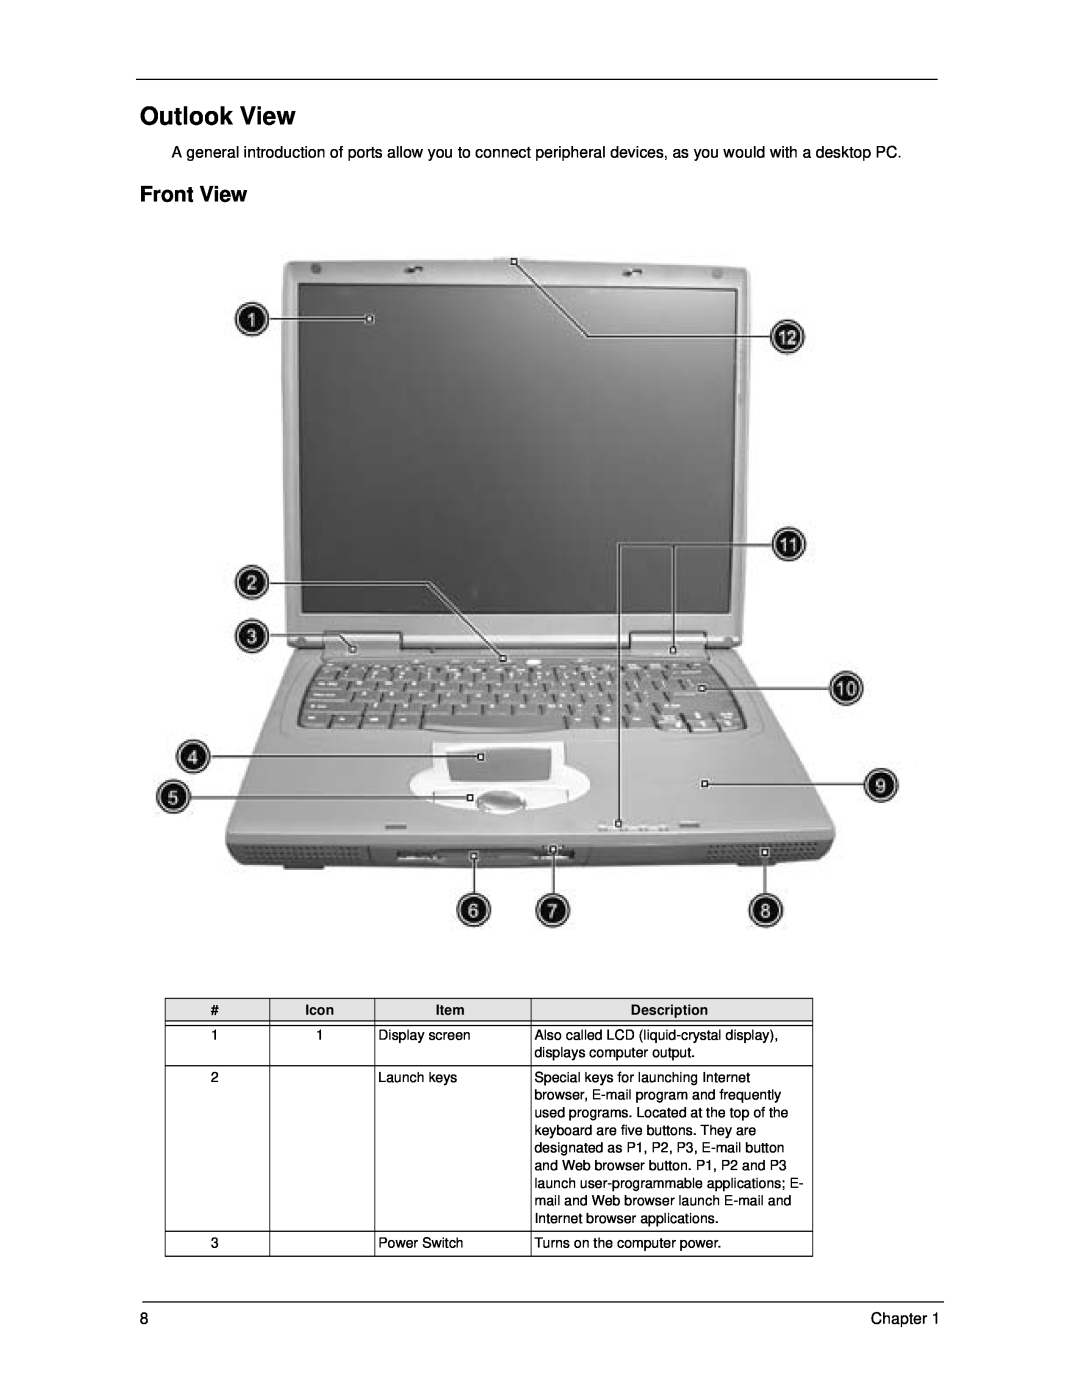 Acer 270 manual Outlook View, Front View, Icon, Description 